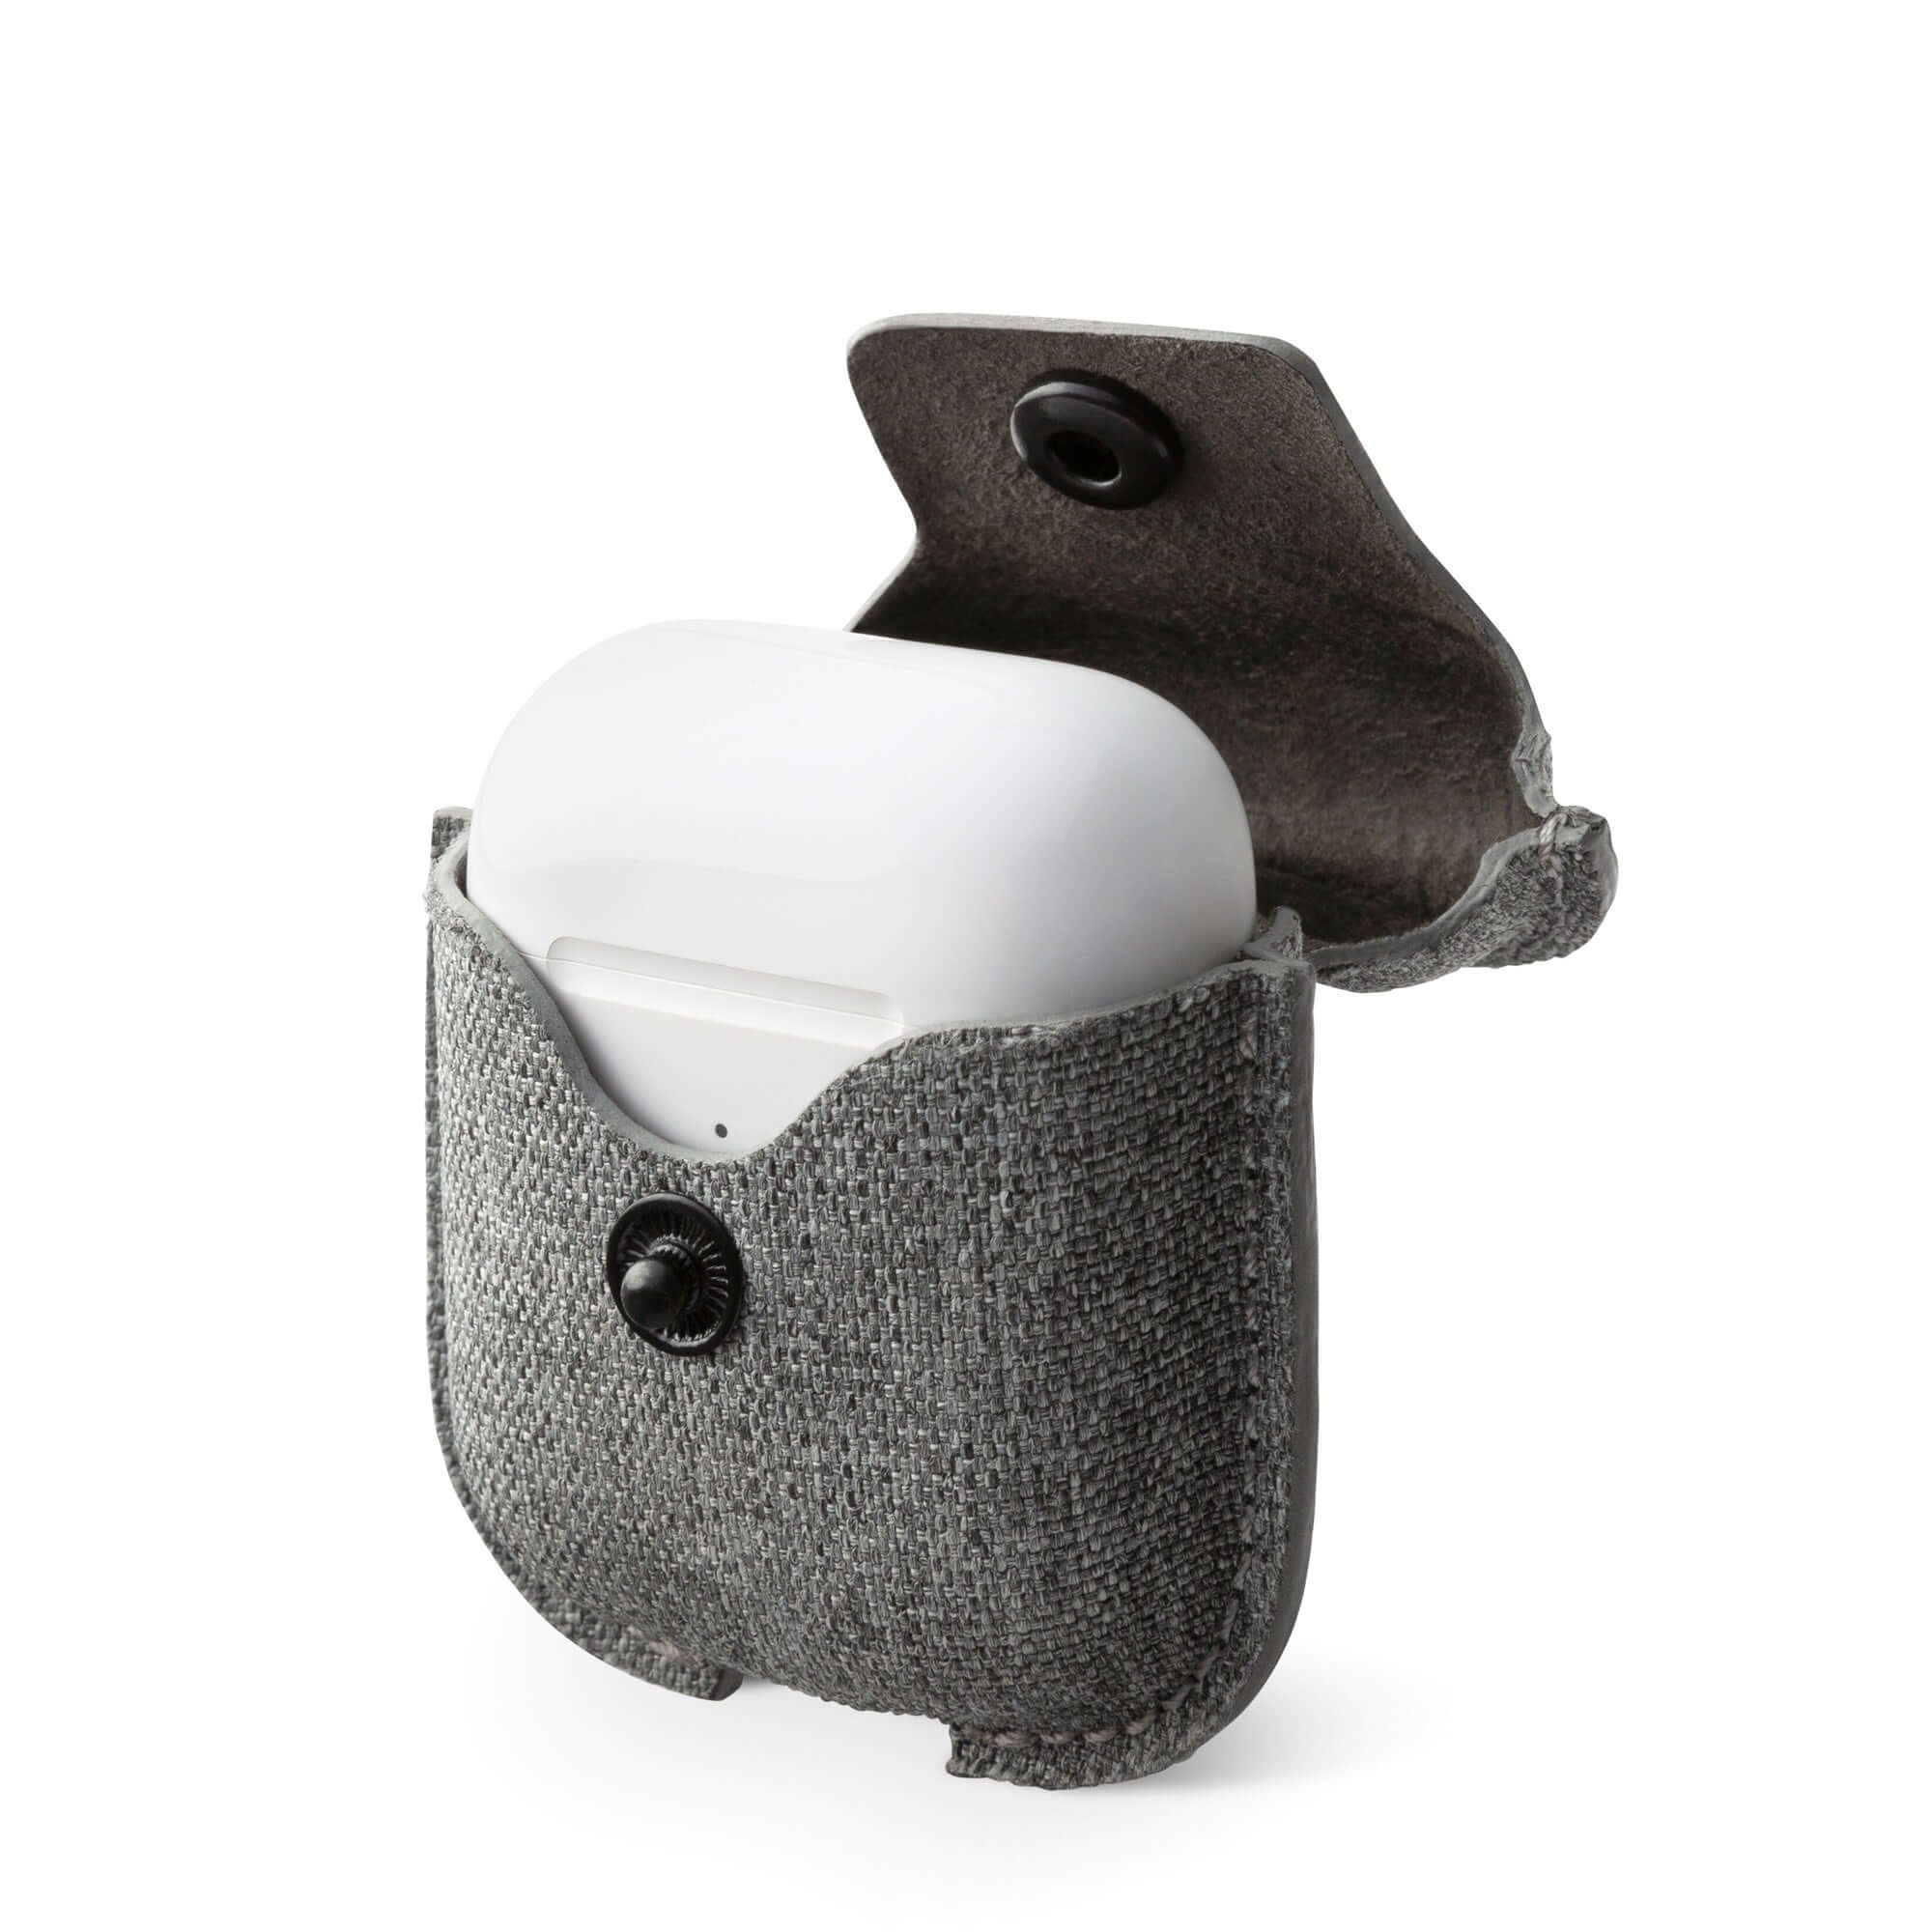 BEON.COM.AU Carry (and protect) your AirPods in style. Slip your AirPods Charging Case into AirSnap to keep your pricey ear buds safe and sound but still easily accessible. Hook the built-in swivel clip to your backpack or bag and you'll never have to search for where you left your AirPods again! When yo... Twelve South at BEON.COM.AU